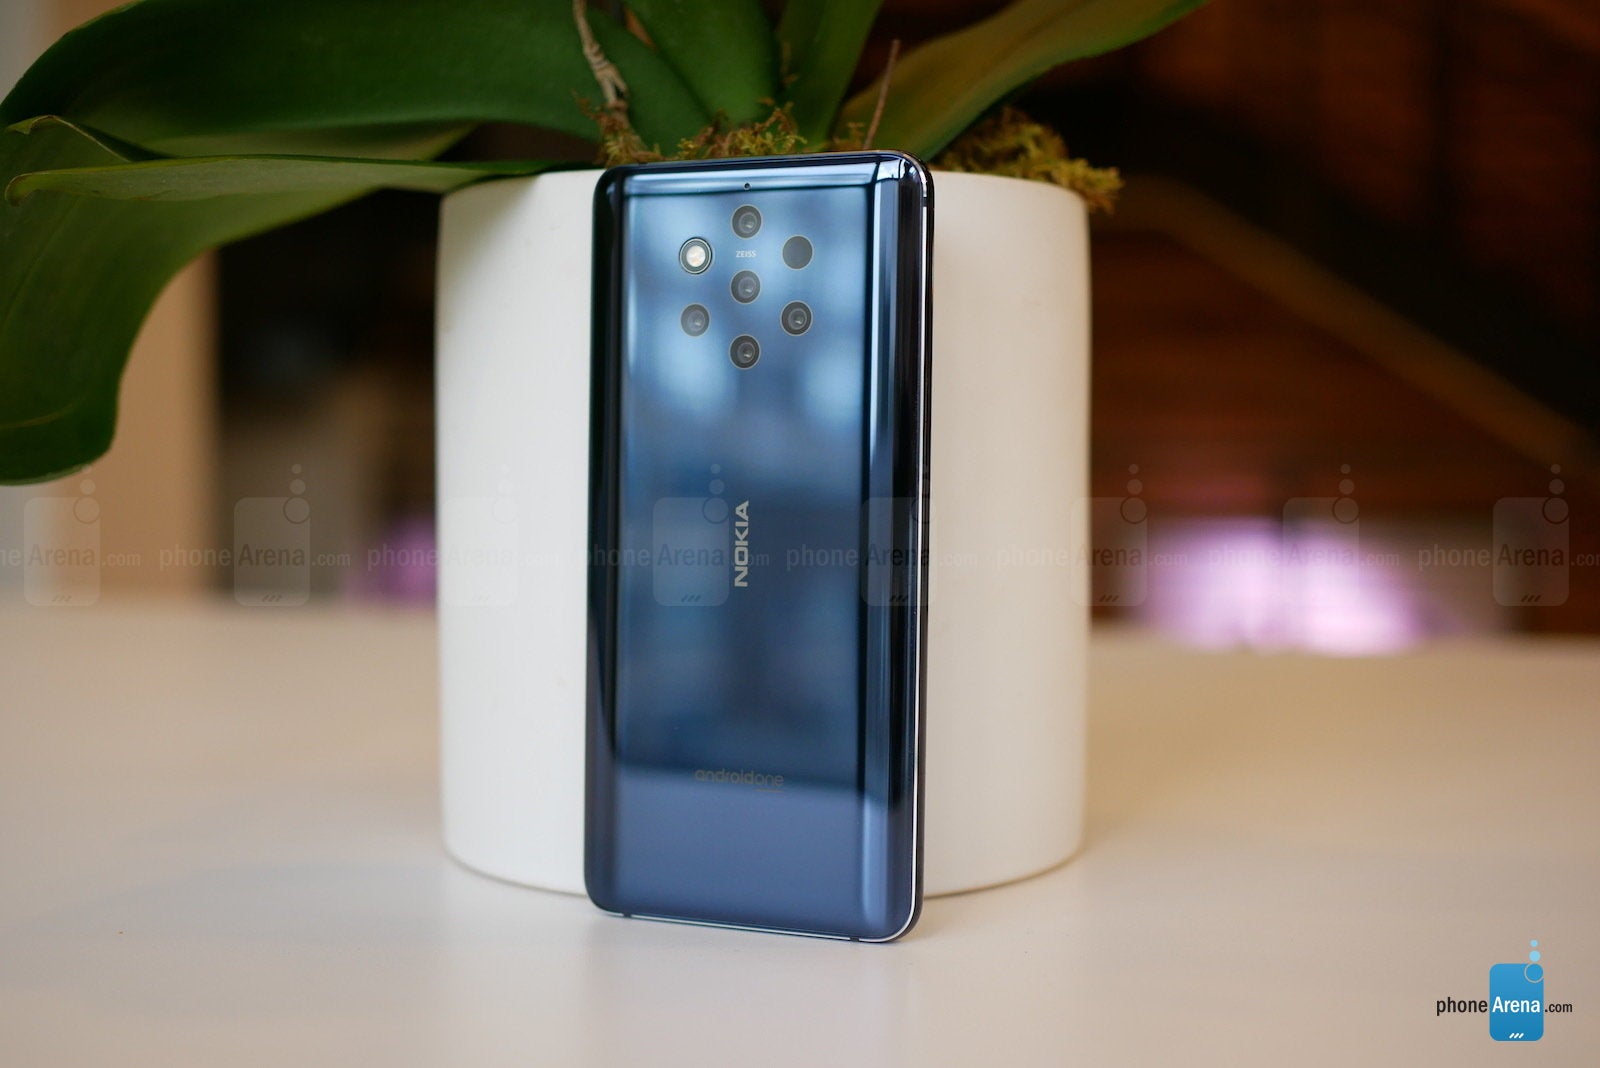 Nokia 9 PureView Hands-On: A cutting-edge Nokia flagship headed to The States!